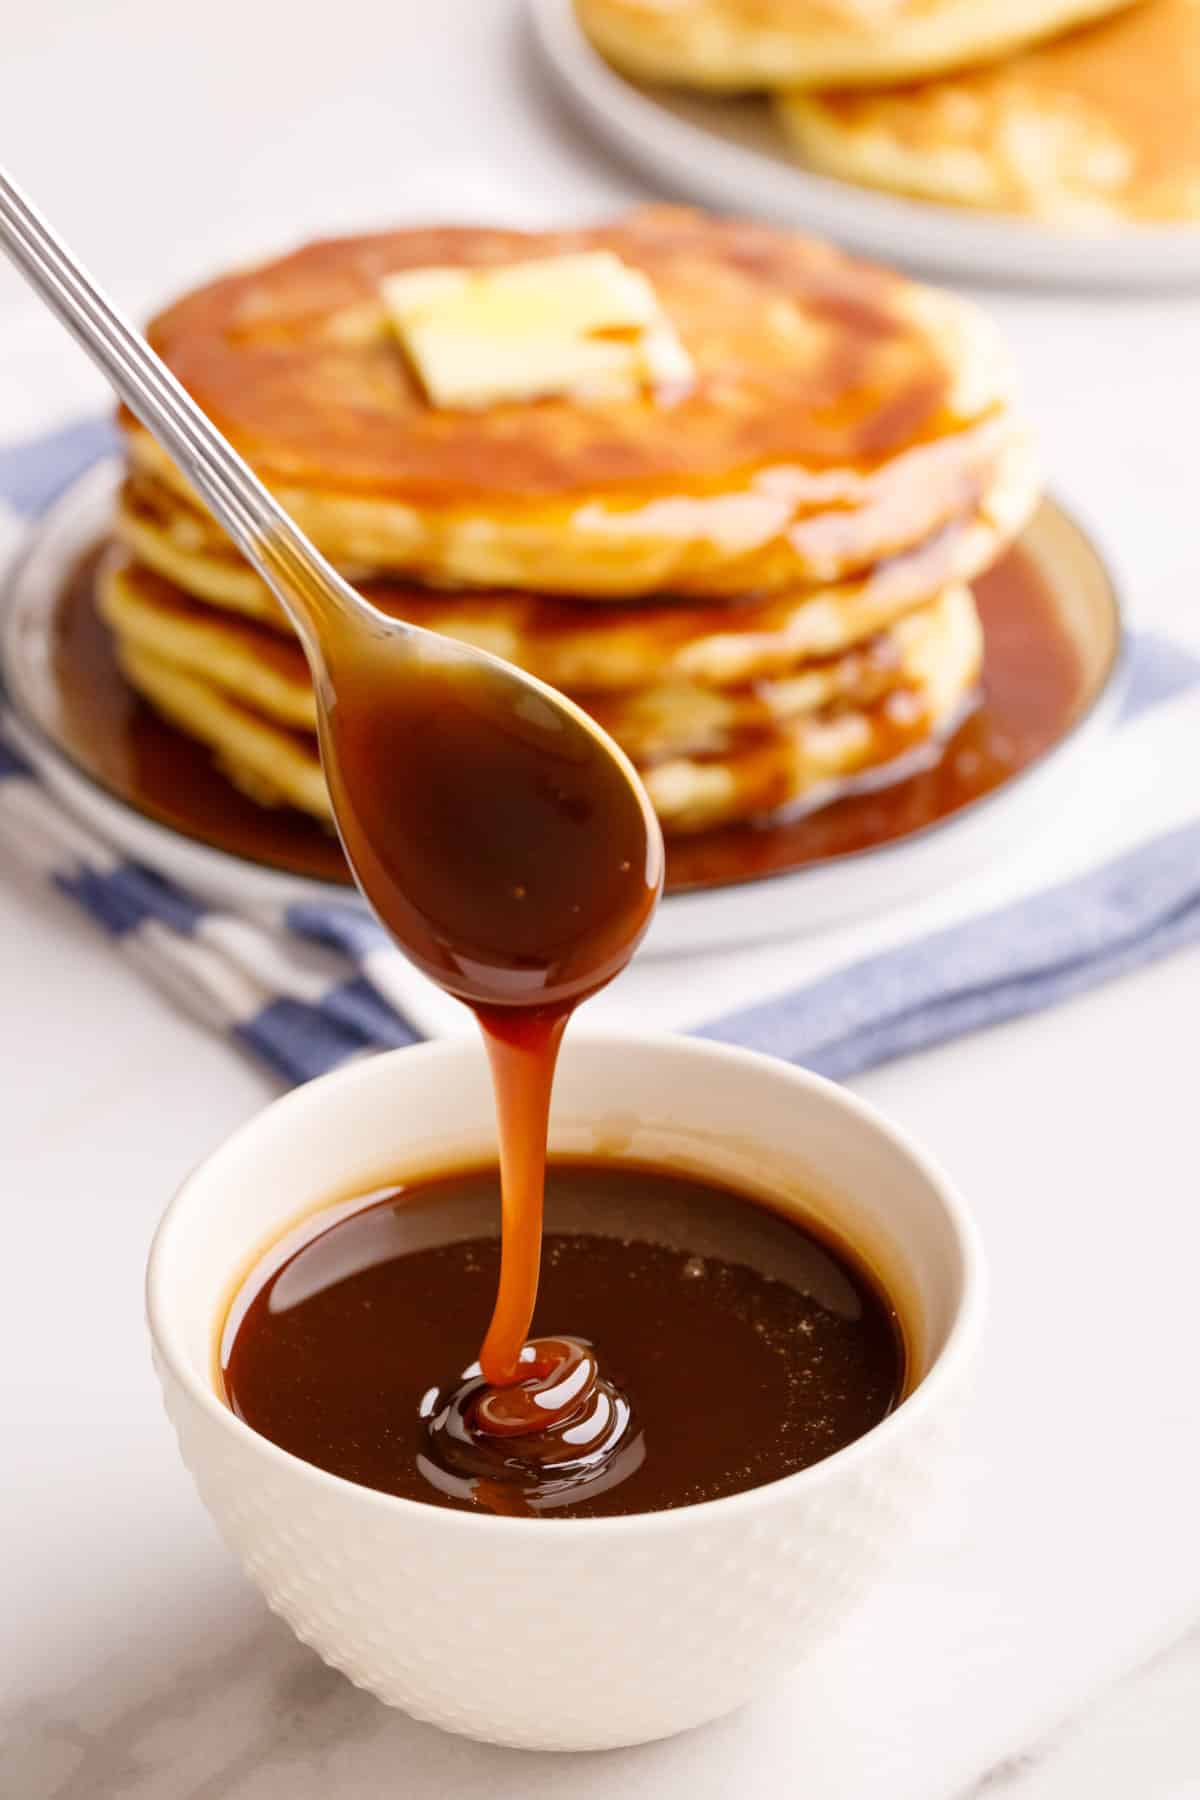 close up image of a bowl and spoon with homemade pancake syrup